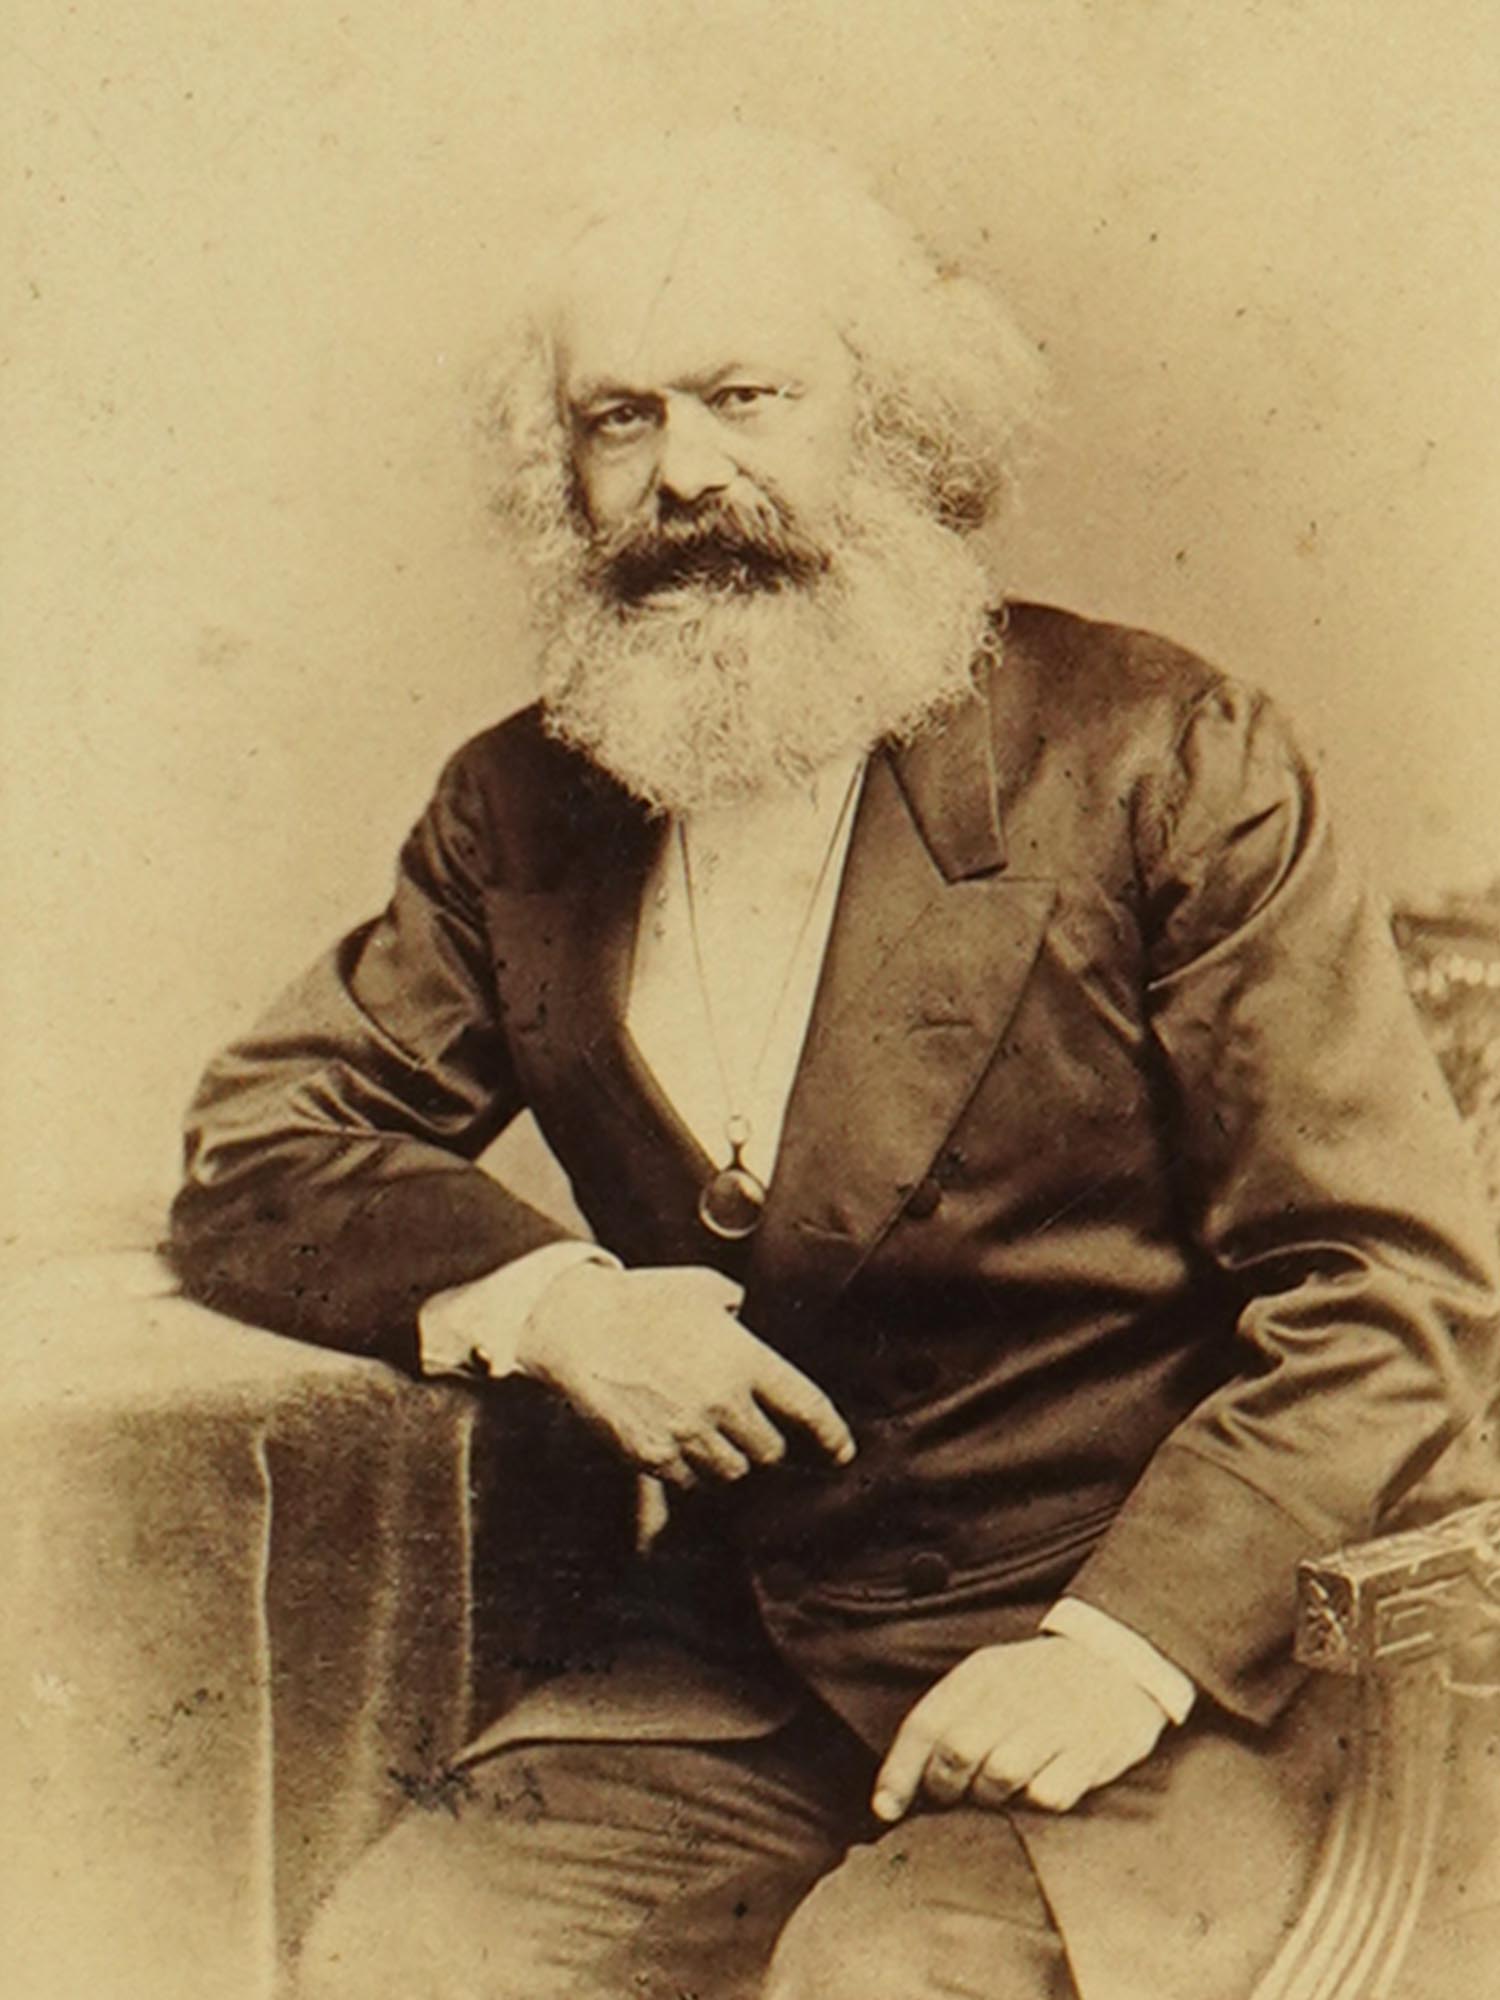 ORIGINAL 1875 PHOTO OF KARL MARX WITH AUTOGRAPH PIC-2